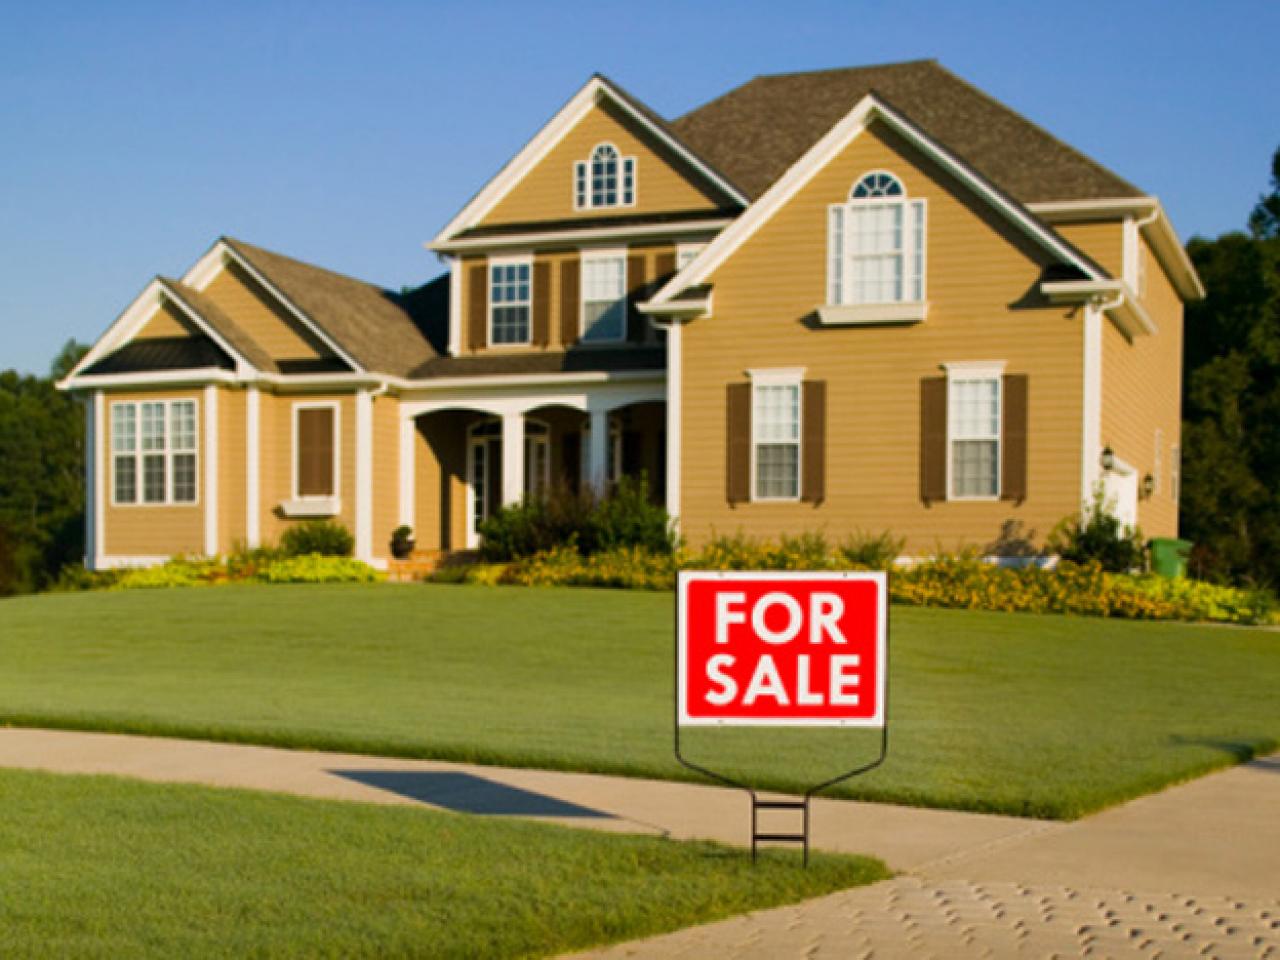 Buy homes for sale: 10 ways to find homes for sale